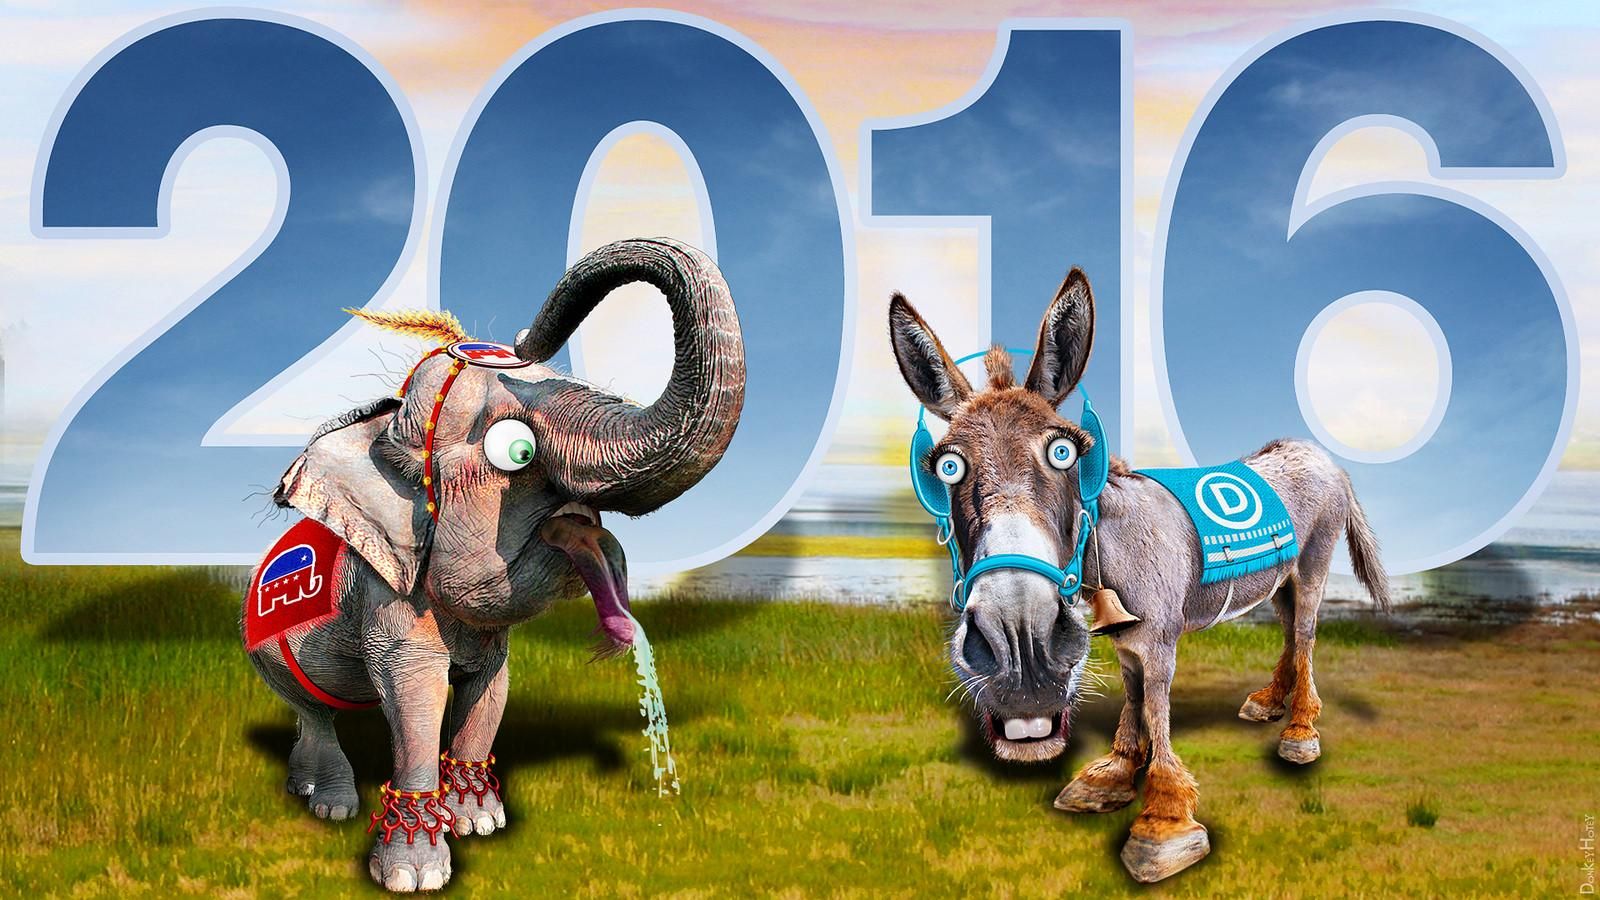 An elephant, the traditional symbol for the Republican party, and a donkey, the traditional symbol for the Democratic party